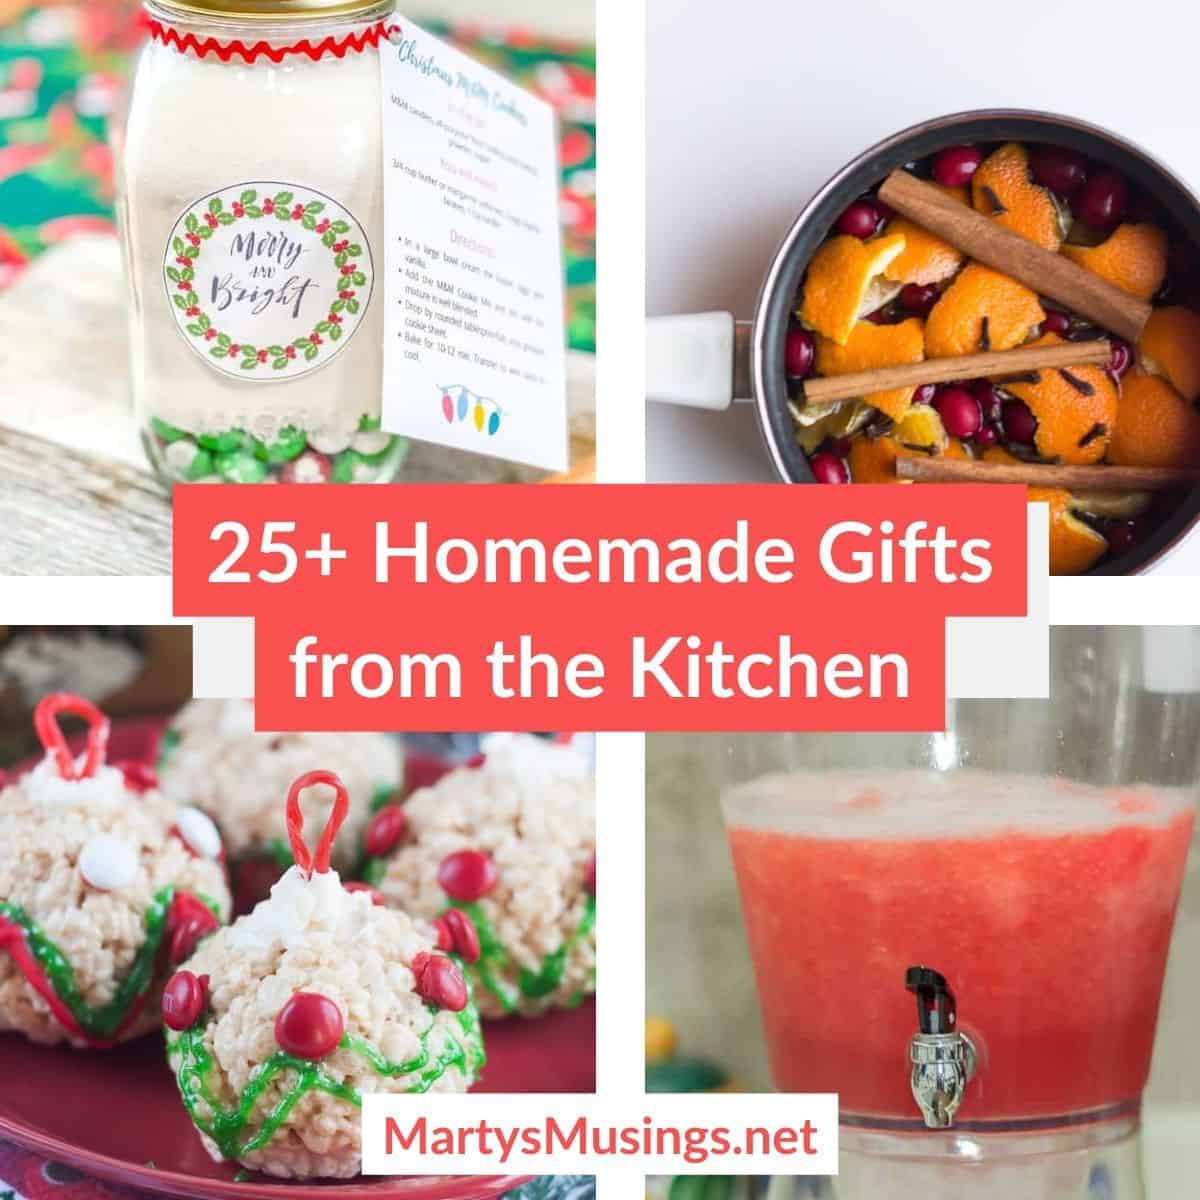 Homemade Gifts from the Kitchen - Marty's Musings